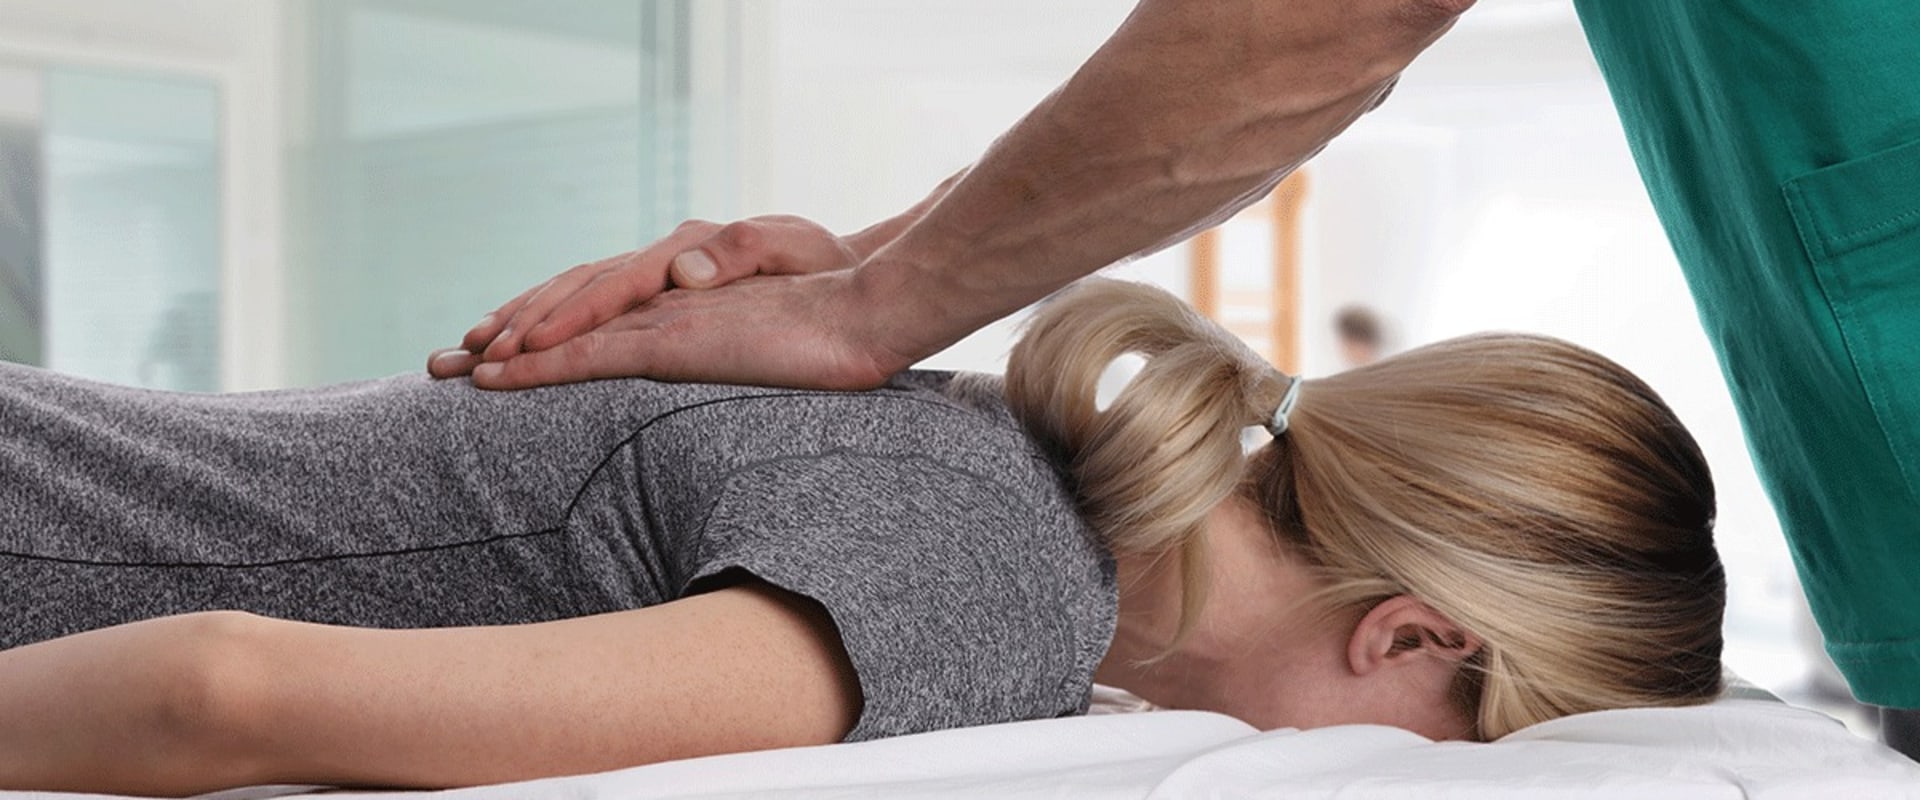 When Should You Not See a Chiropractor?